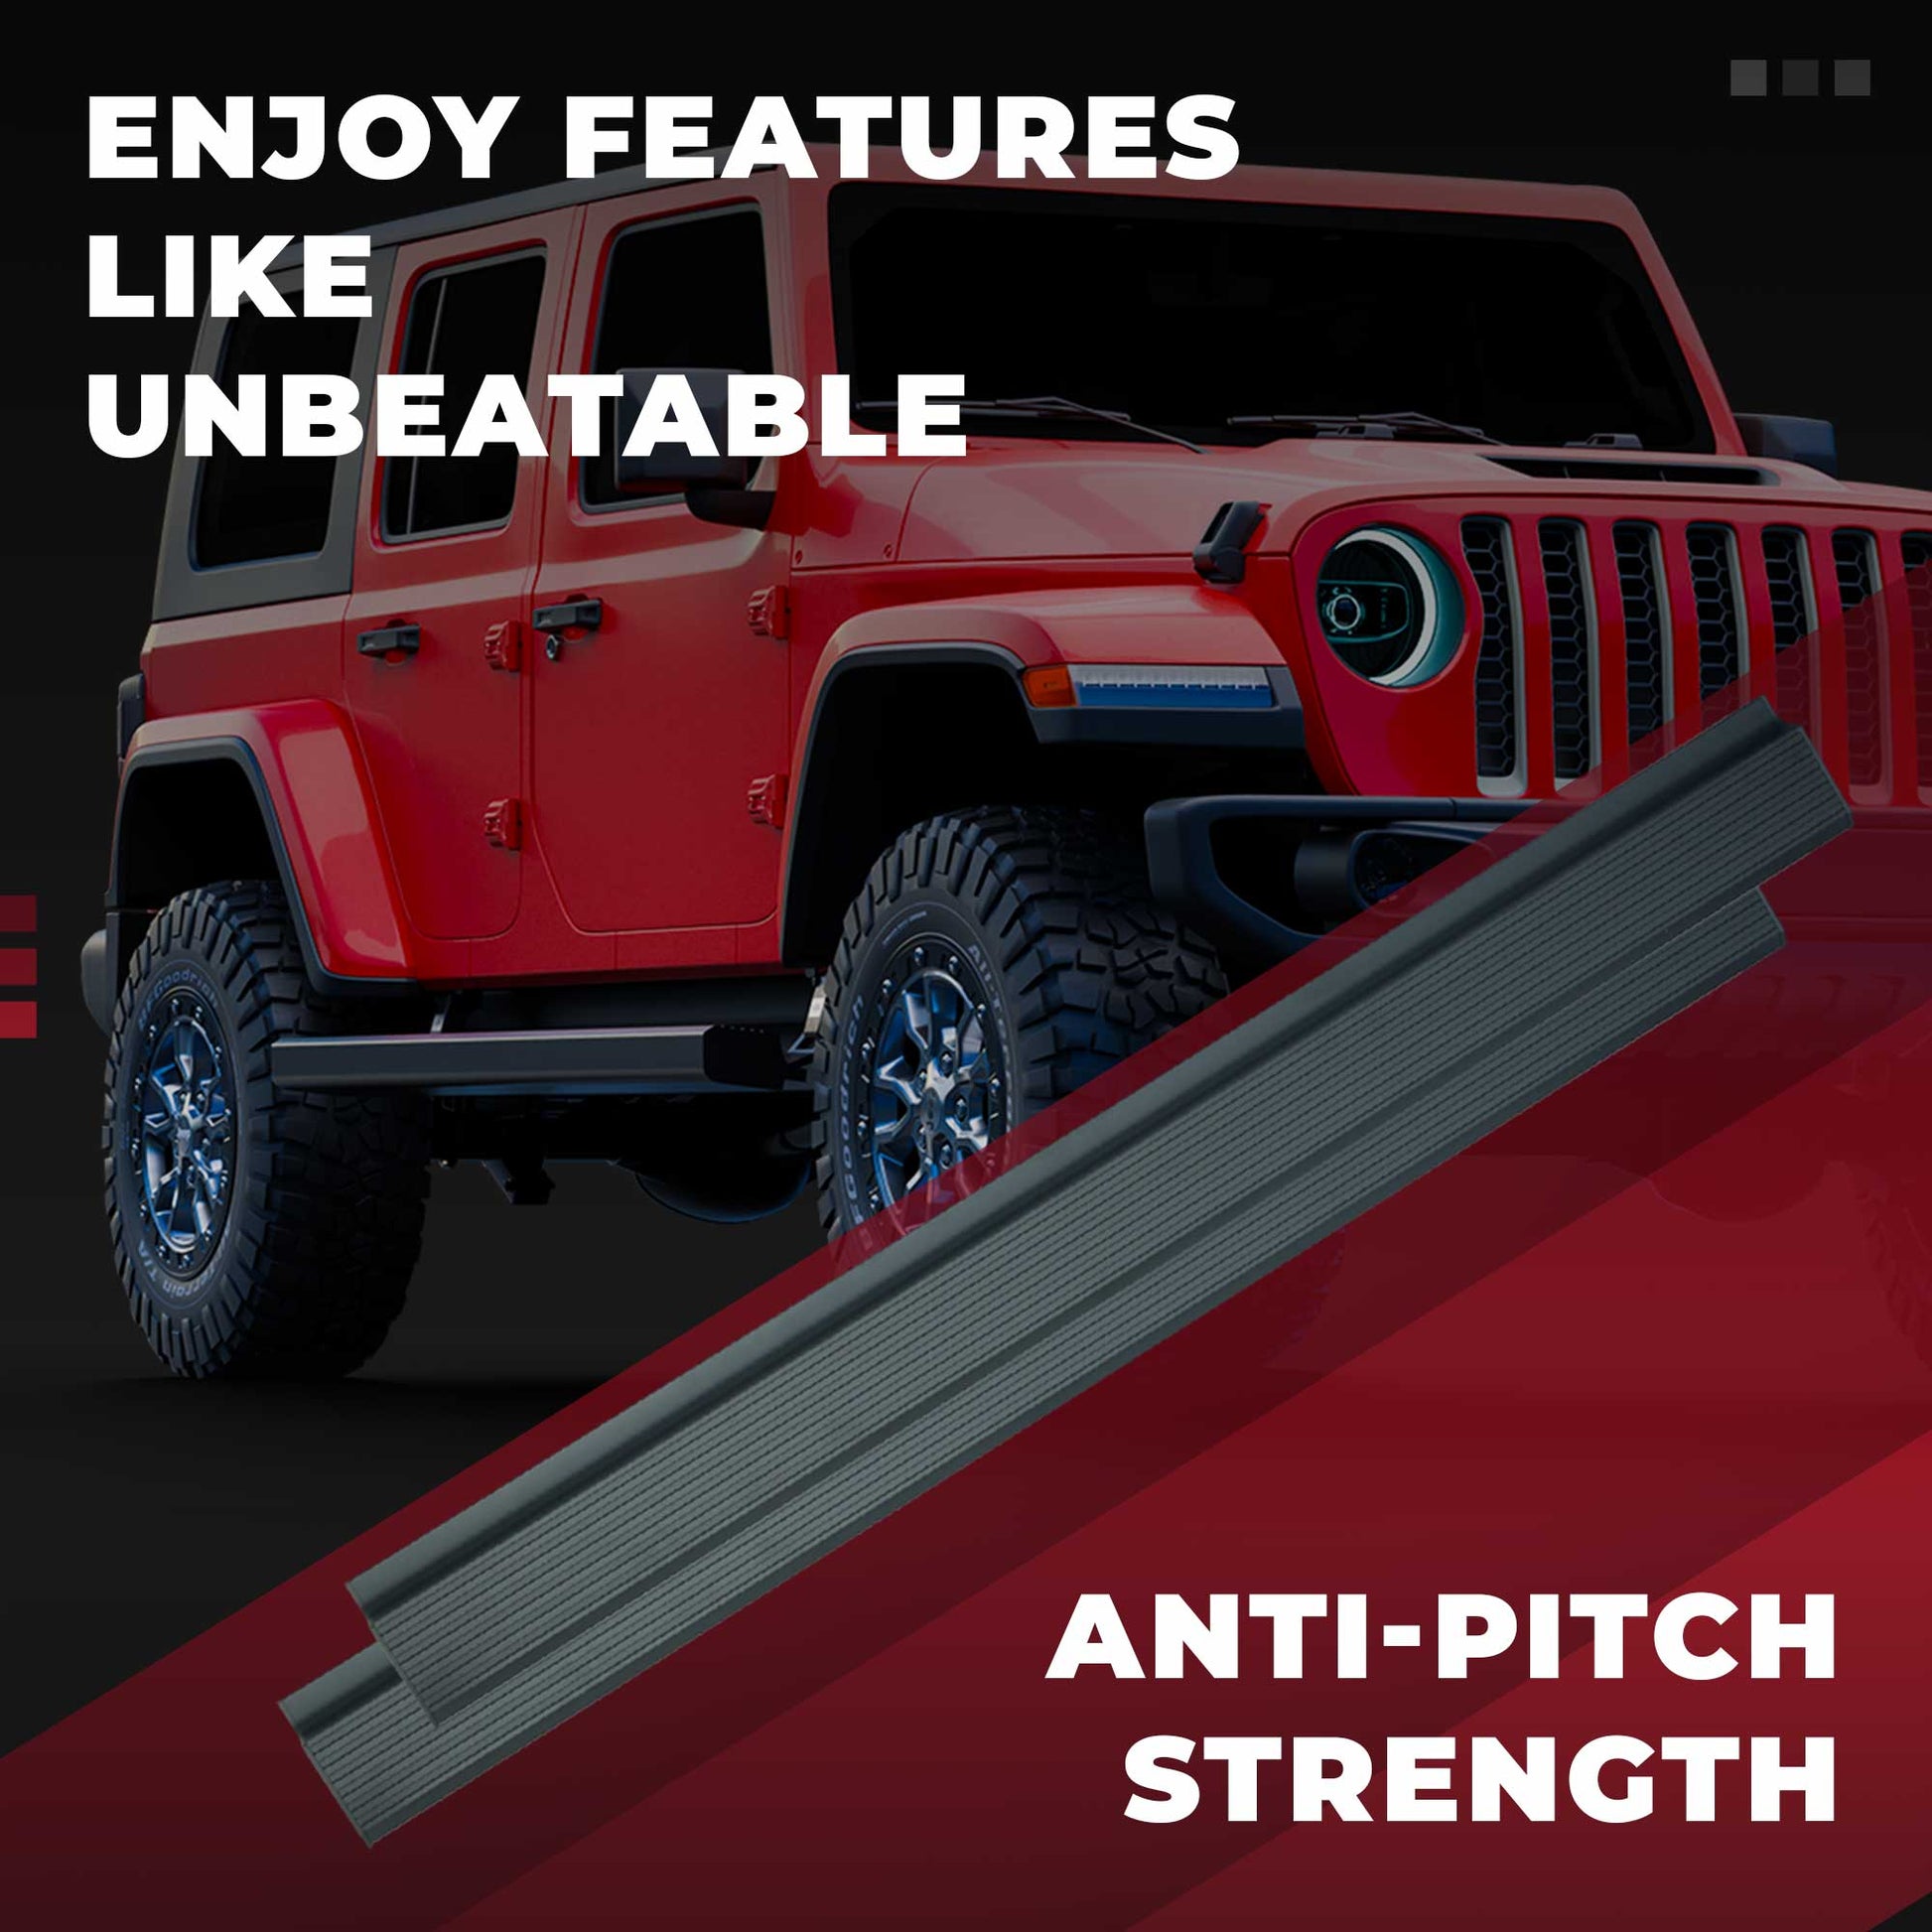 JCBL Accessories Automatic Door Side E-Step for SUVs (Jeep Wrangler 18+ E-Side Step) | ENJOY FEATURES LIKE UNBEATABLE | ANTI-PITCH STRENGTH